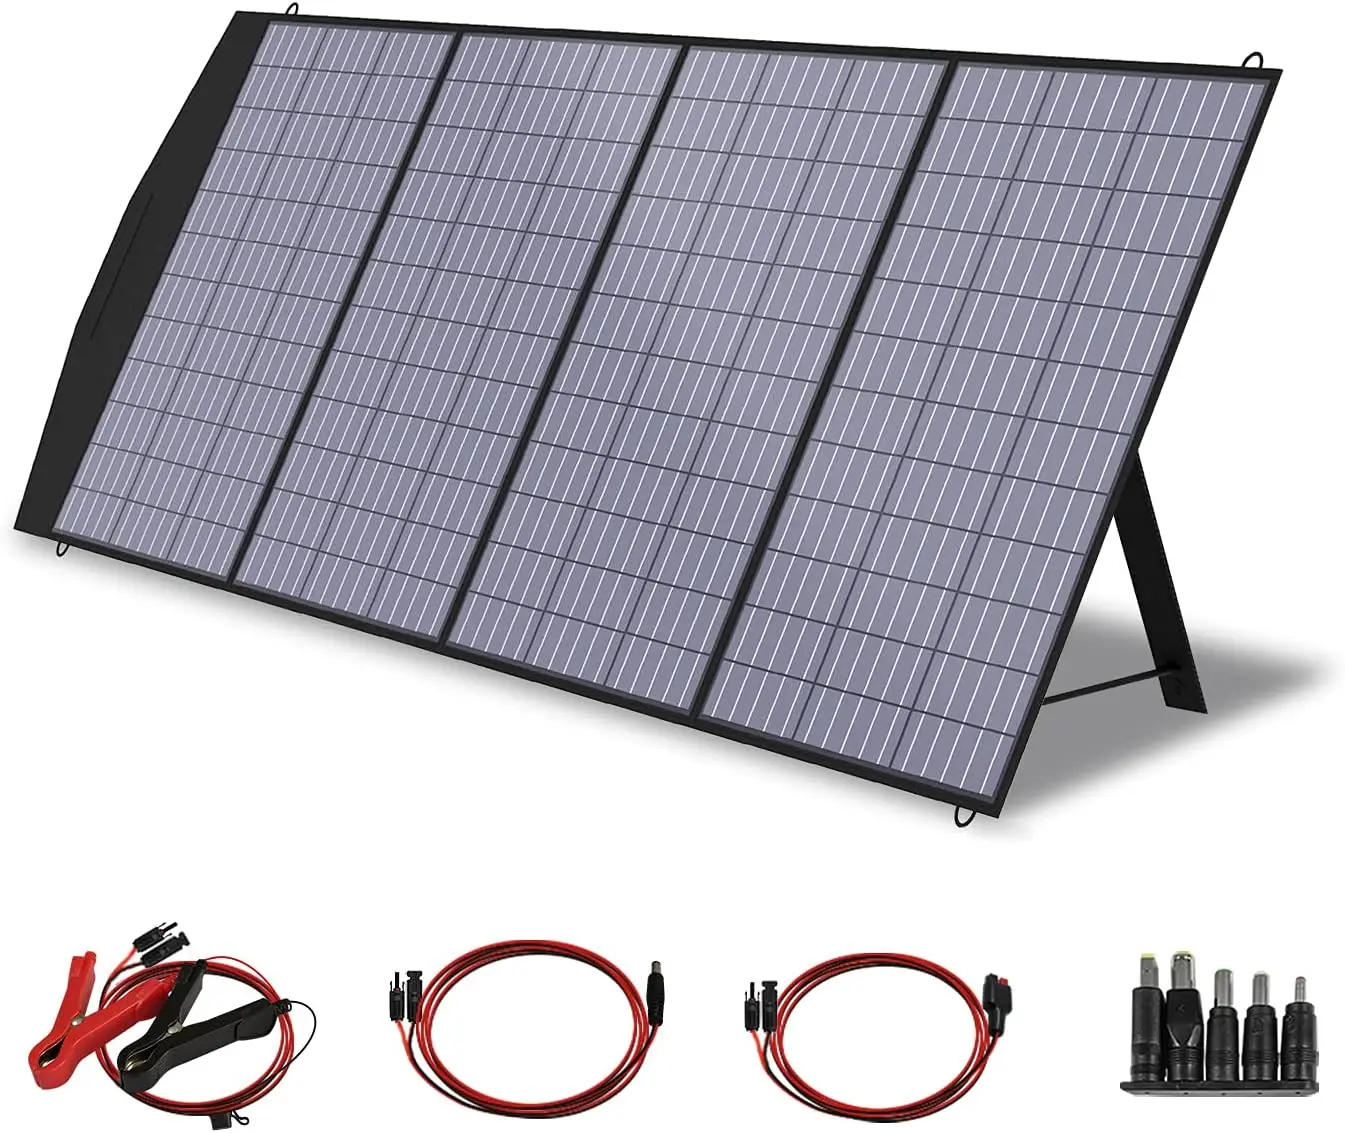 

200W Portable Solar Panel 18V Foldable Solar Panel Kit with -4 Output Waterproof IP66 Solar Charger for RV Laptops Solar Generat